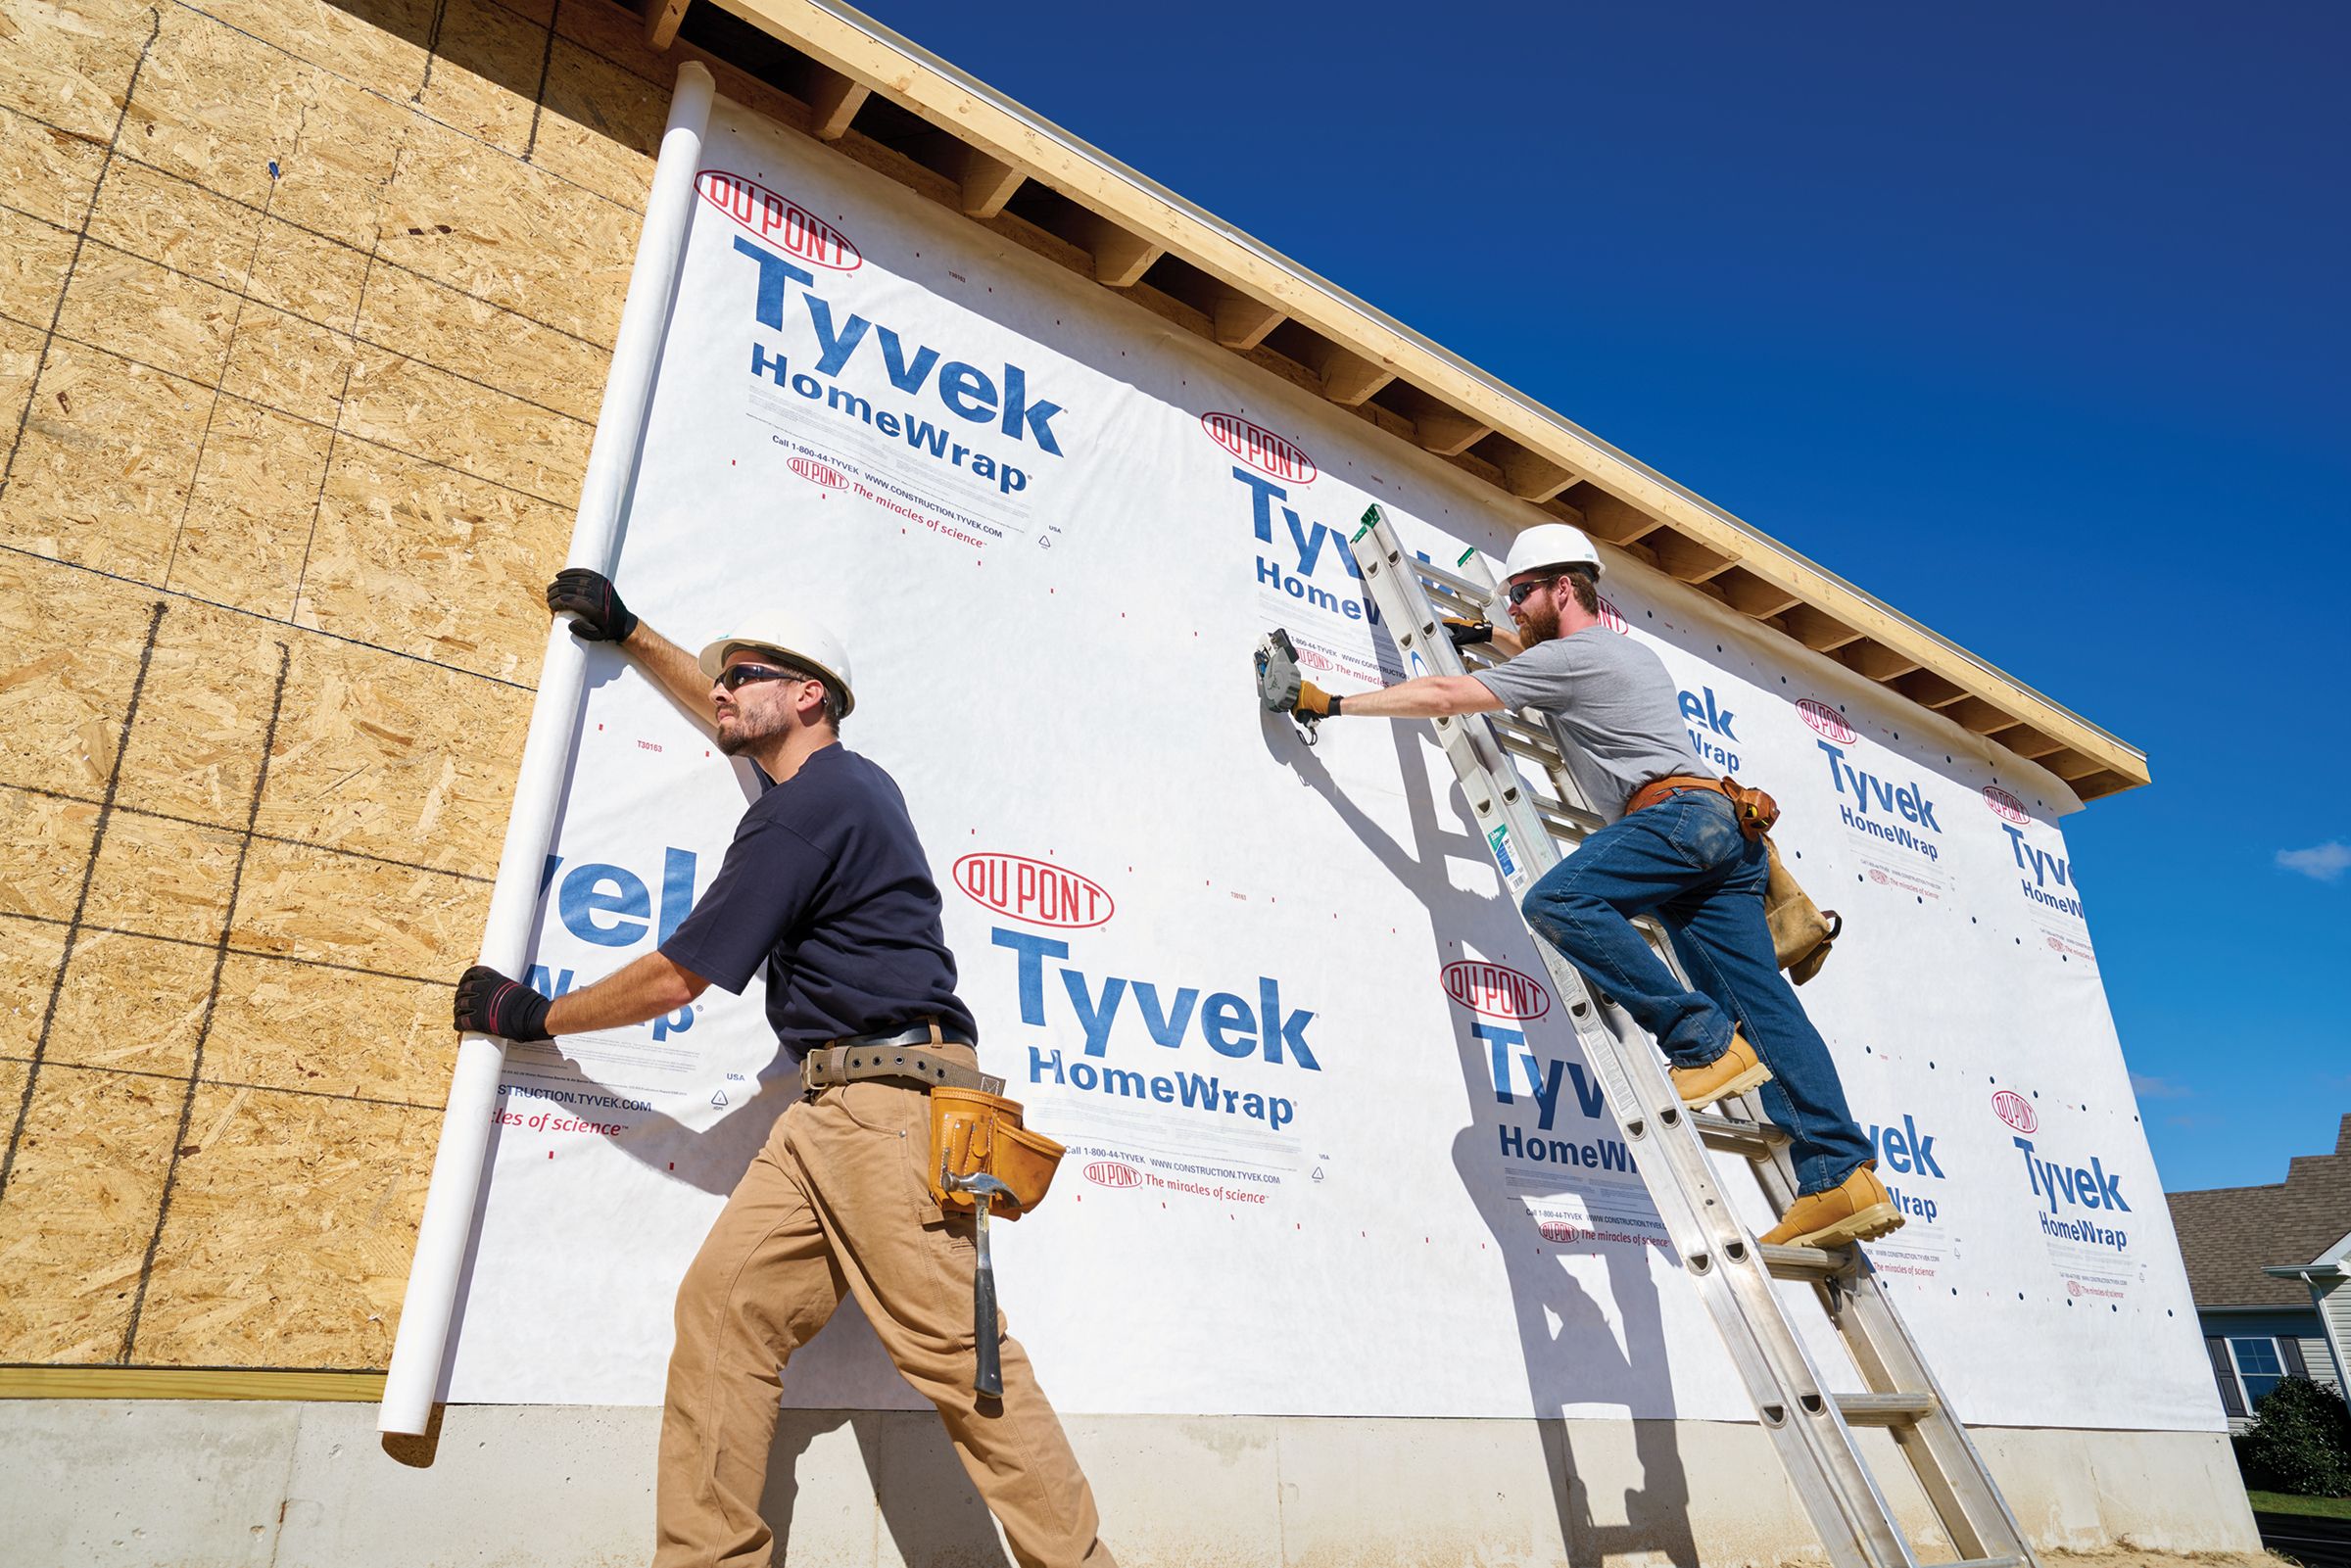 Jun -ProdsSvc - DuPont - DuPont Safety & Construction Invests Over $400 Million to Increase Tyvek® Capacity